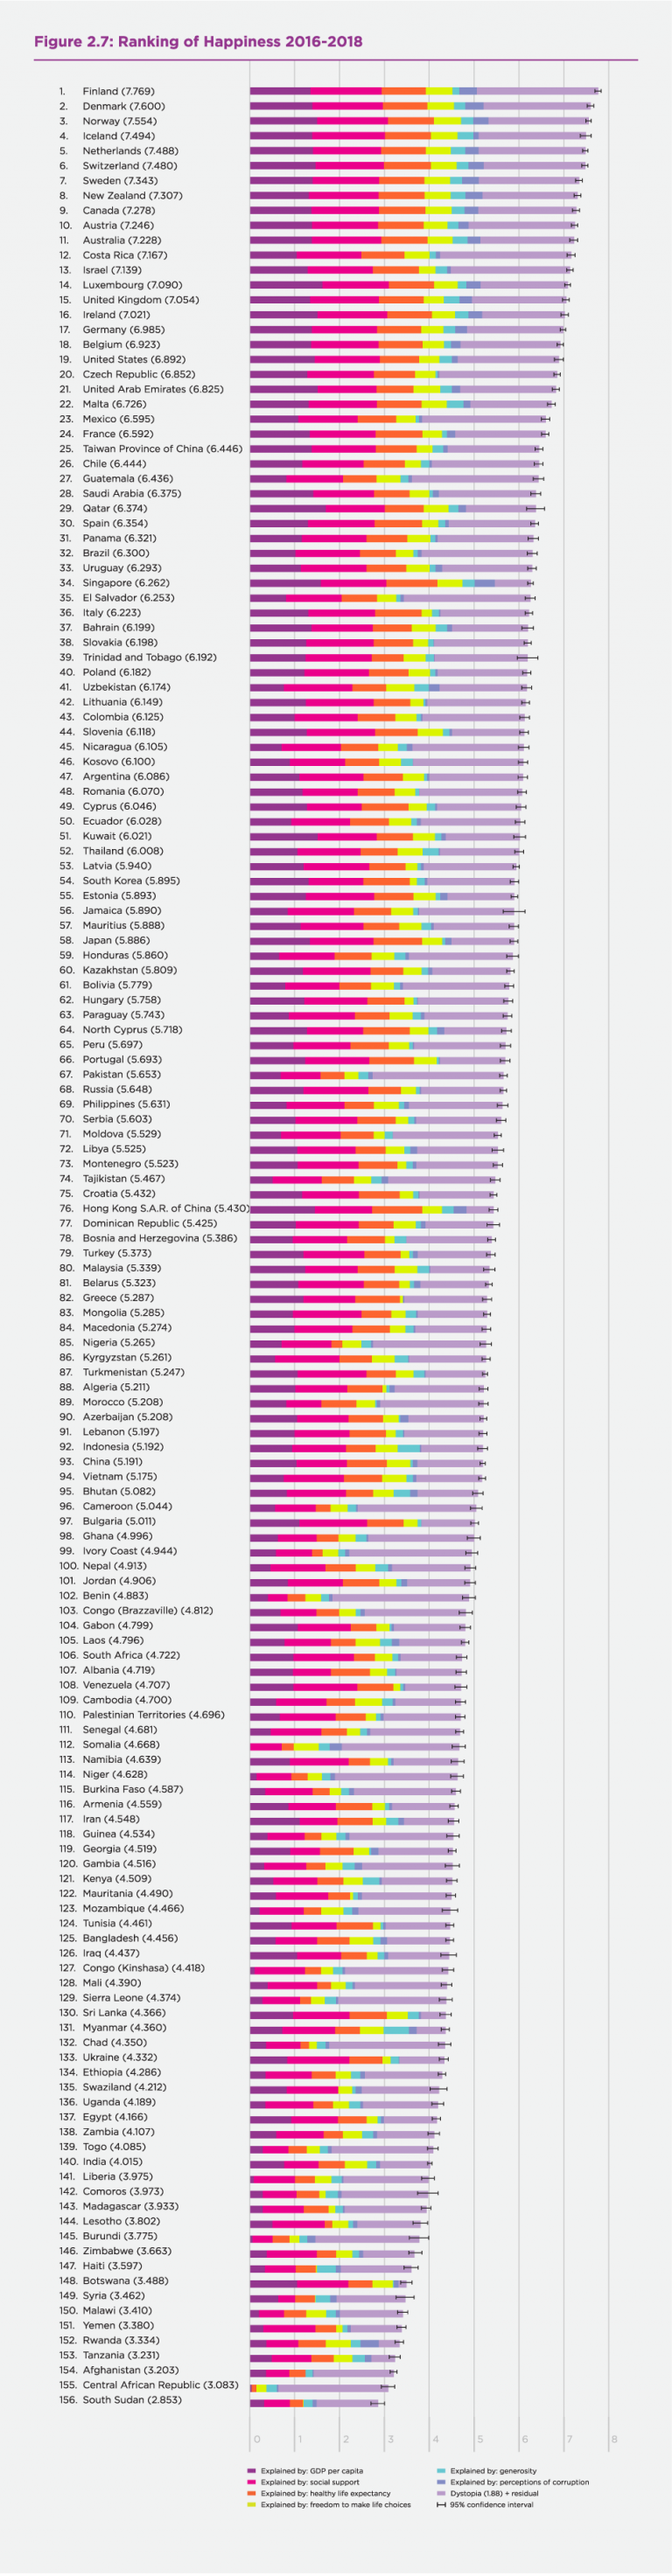 World Happiness Issues Ranking of Happiest Countries